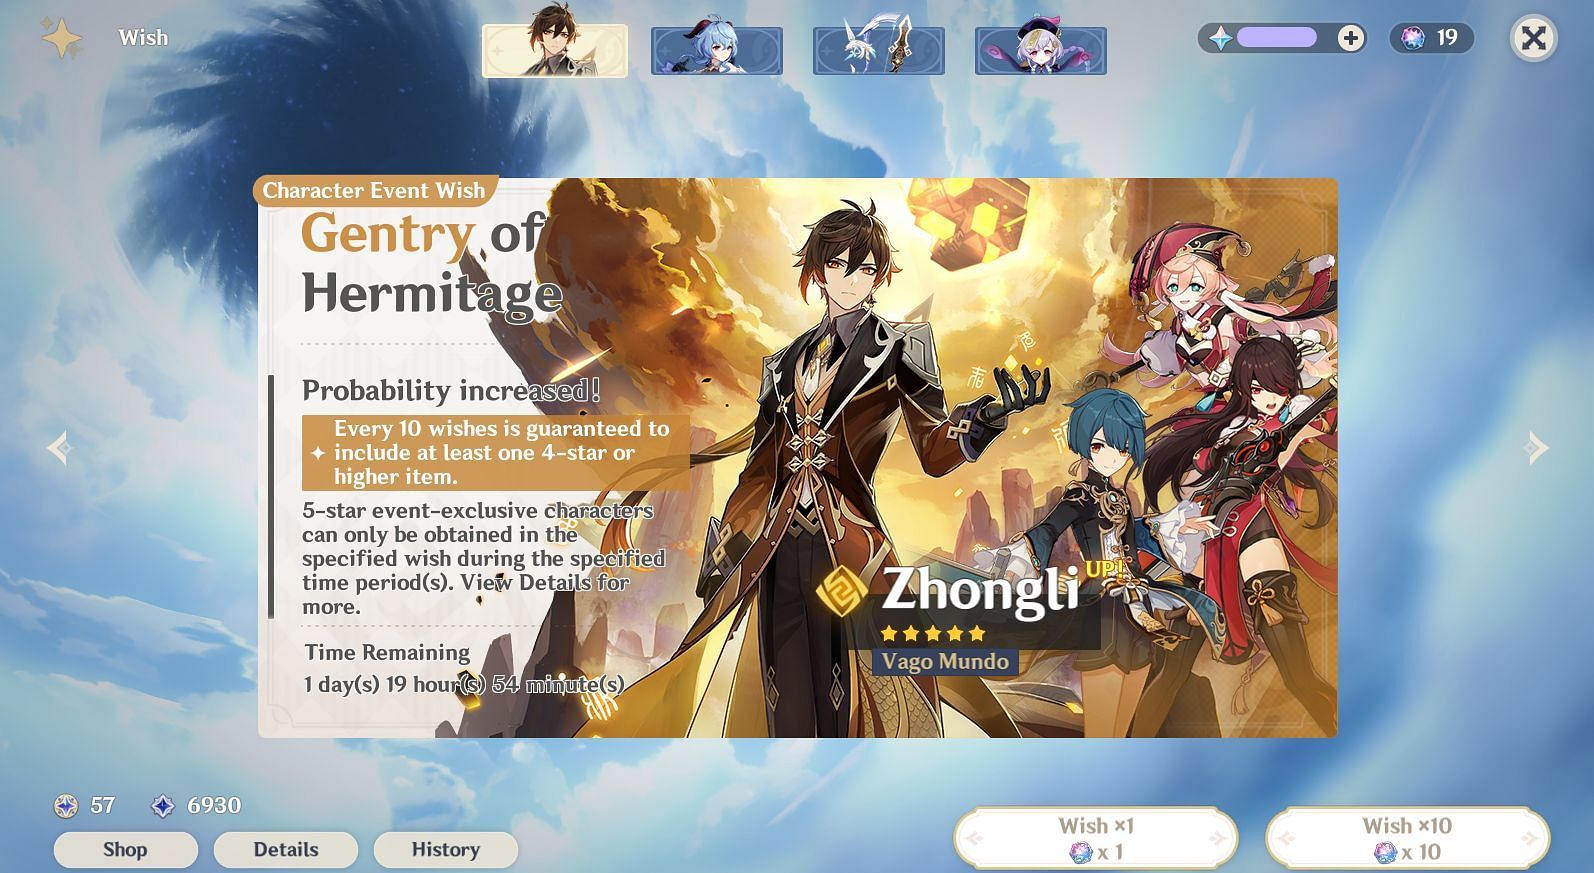 All banners in the current version 2.4 (Image via miHoYo)